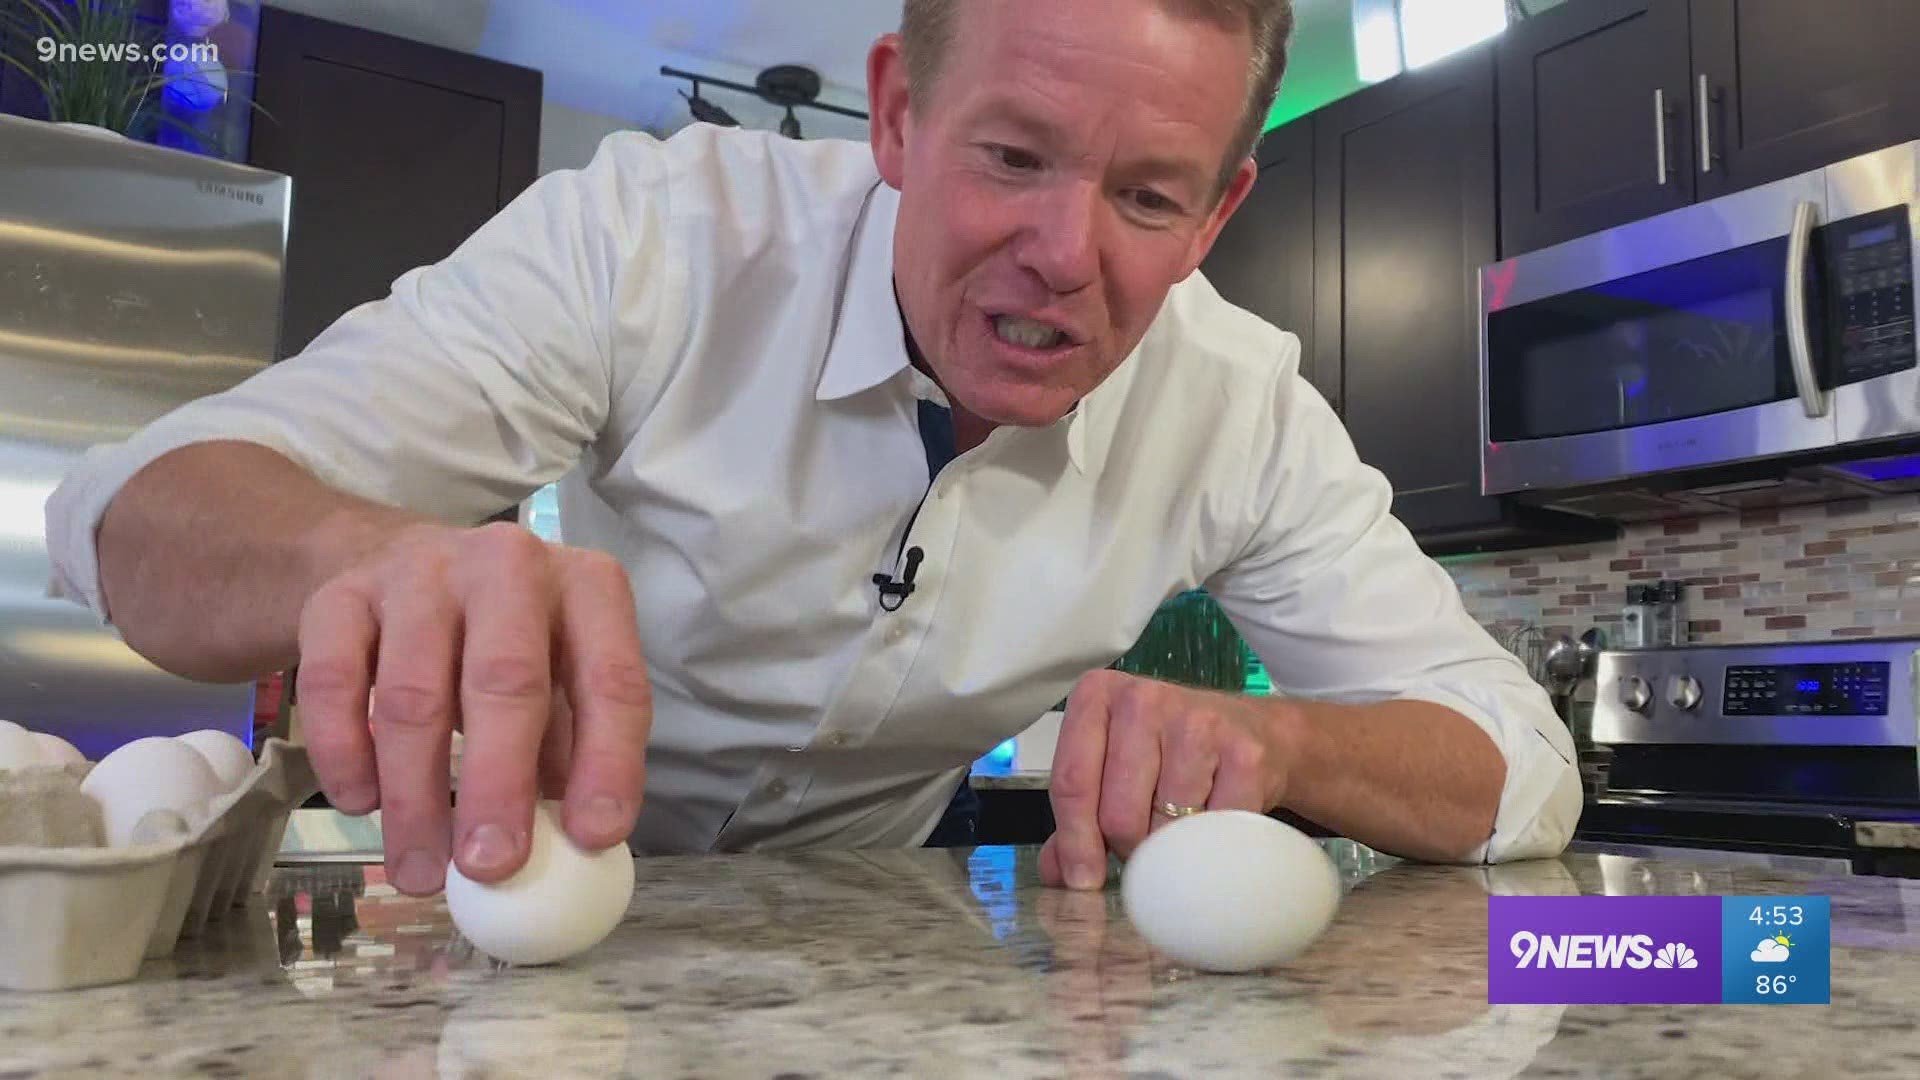 Steve Spangler shows two fun challenges involving eggs.